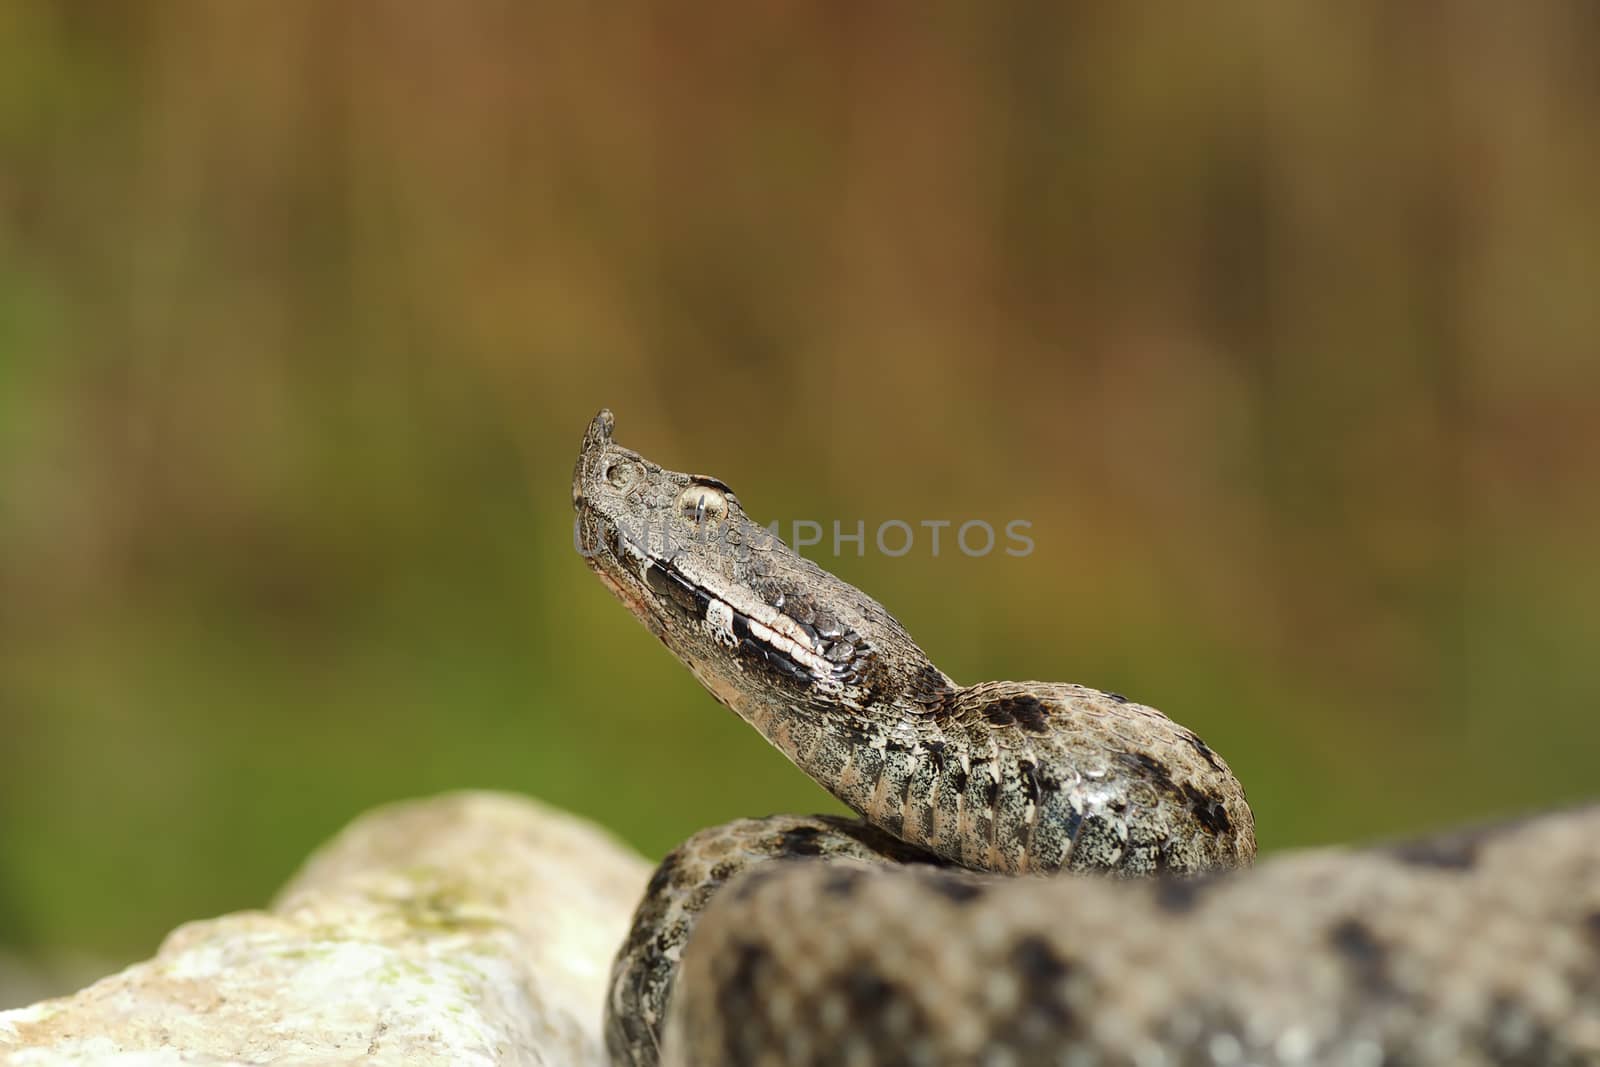 dangerous snake ready to attack by taviphoto